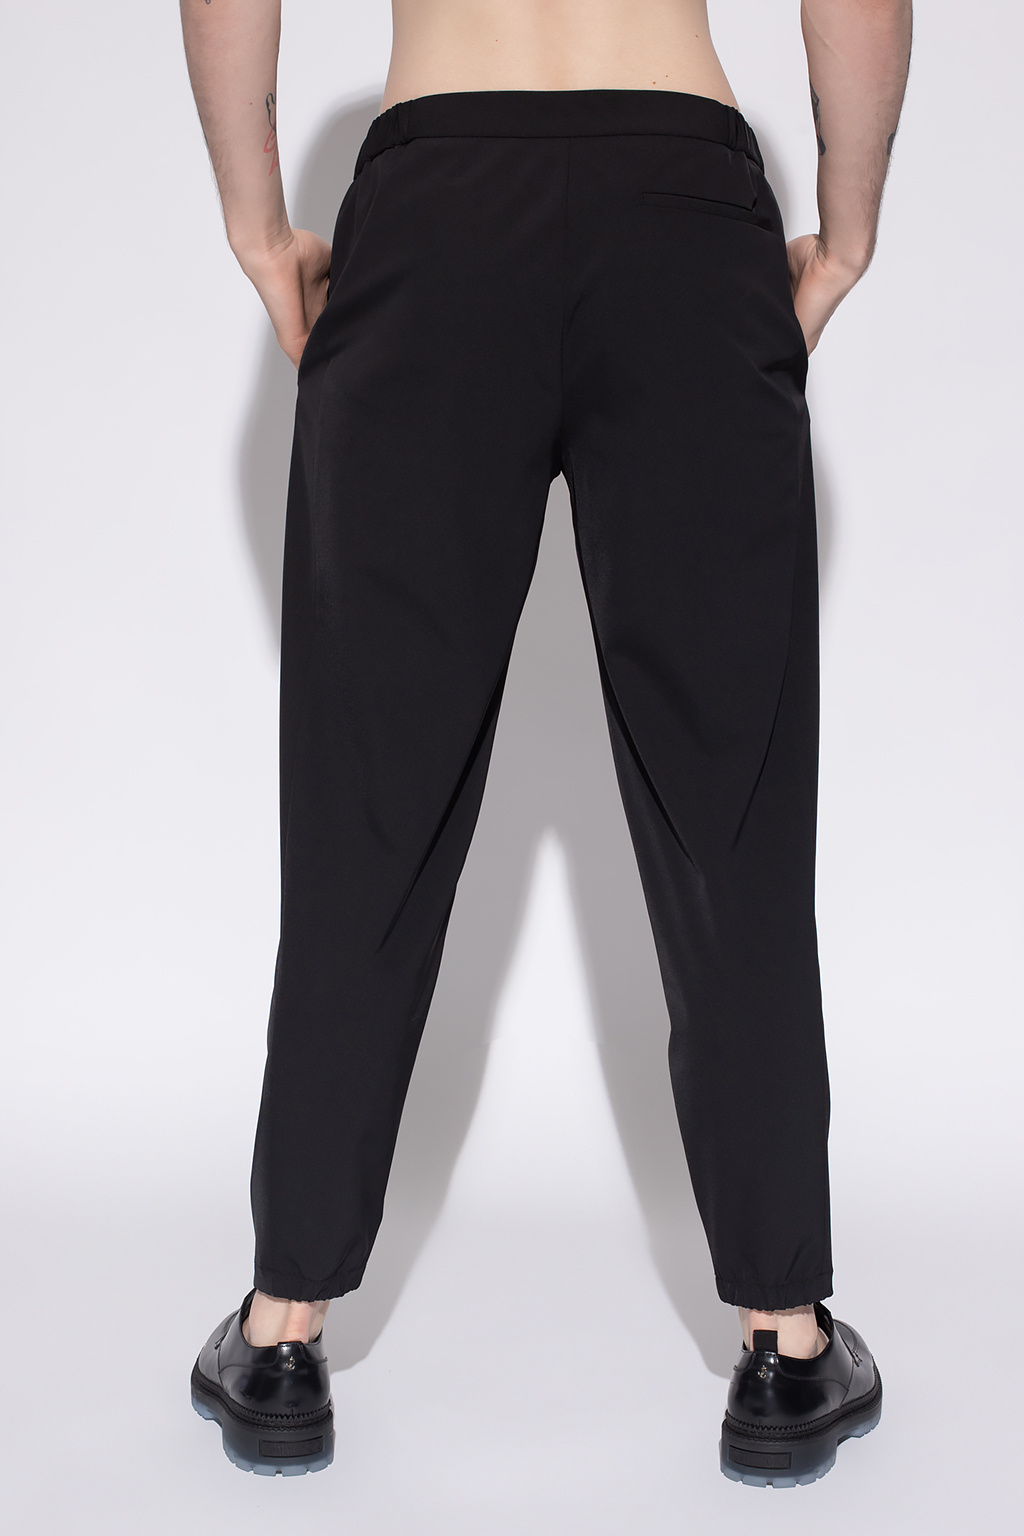 Emporio Armani trousers Striped with stitching